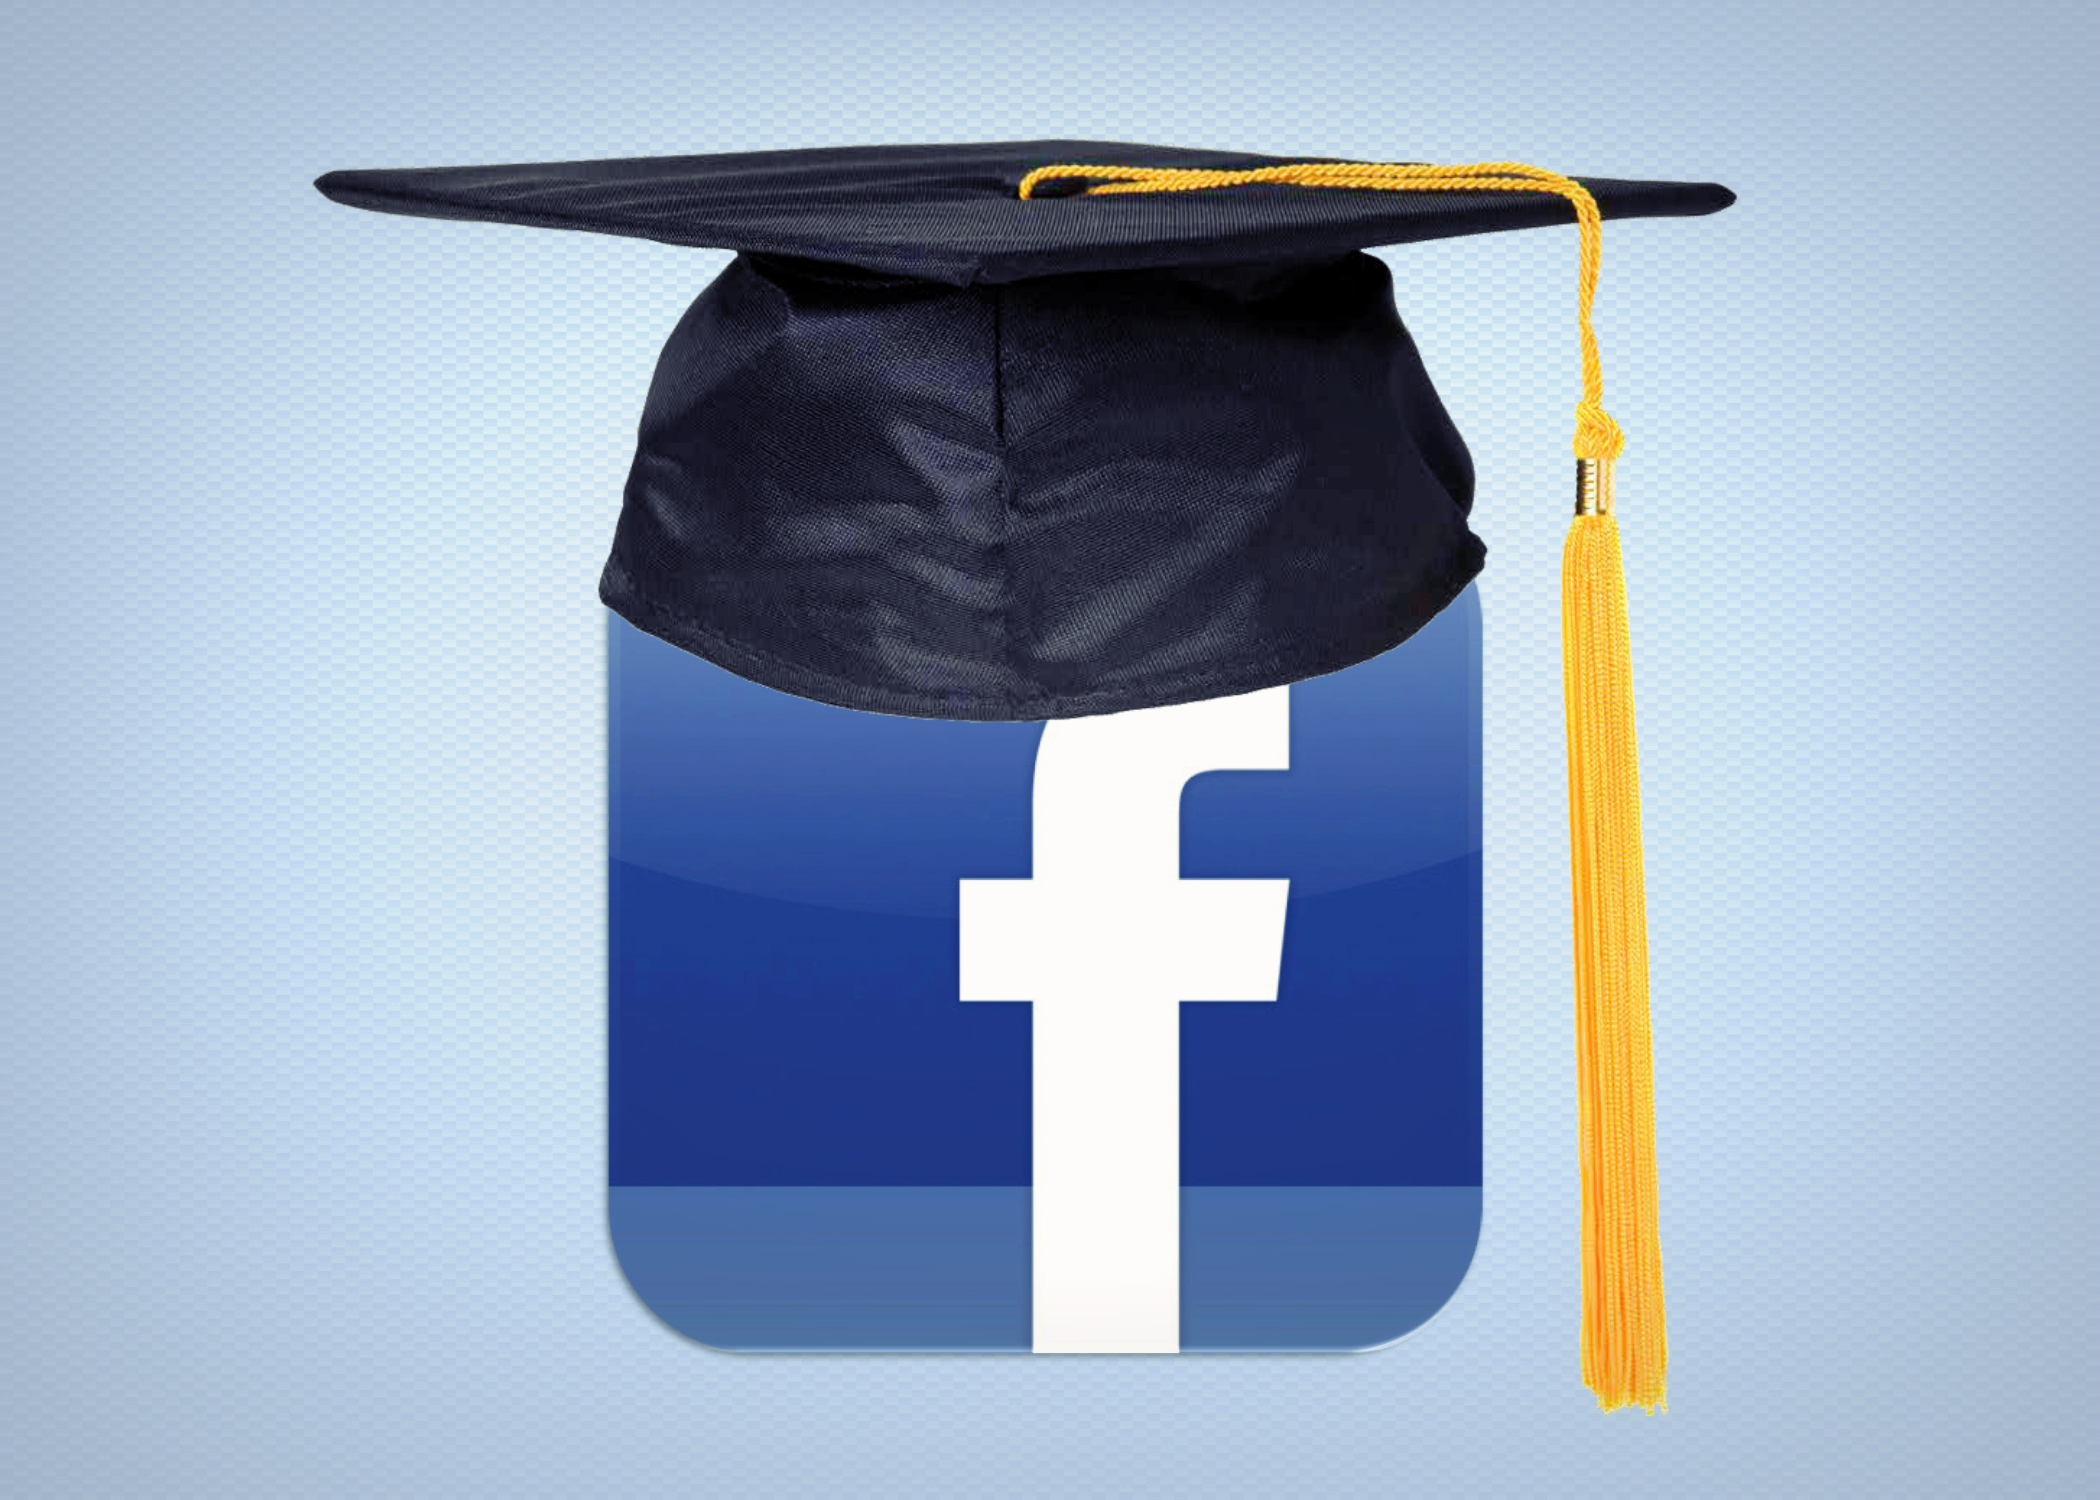 How to earn a free education from Facebook “University” | USC Annenberg  School for Communication and Journalism